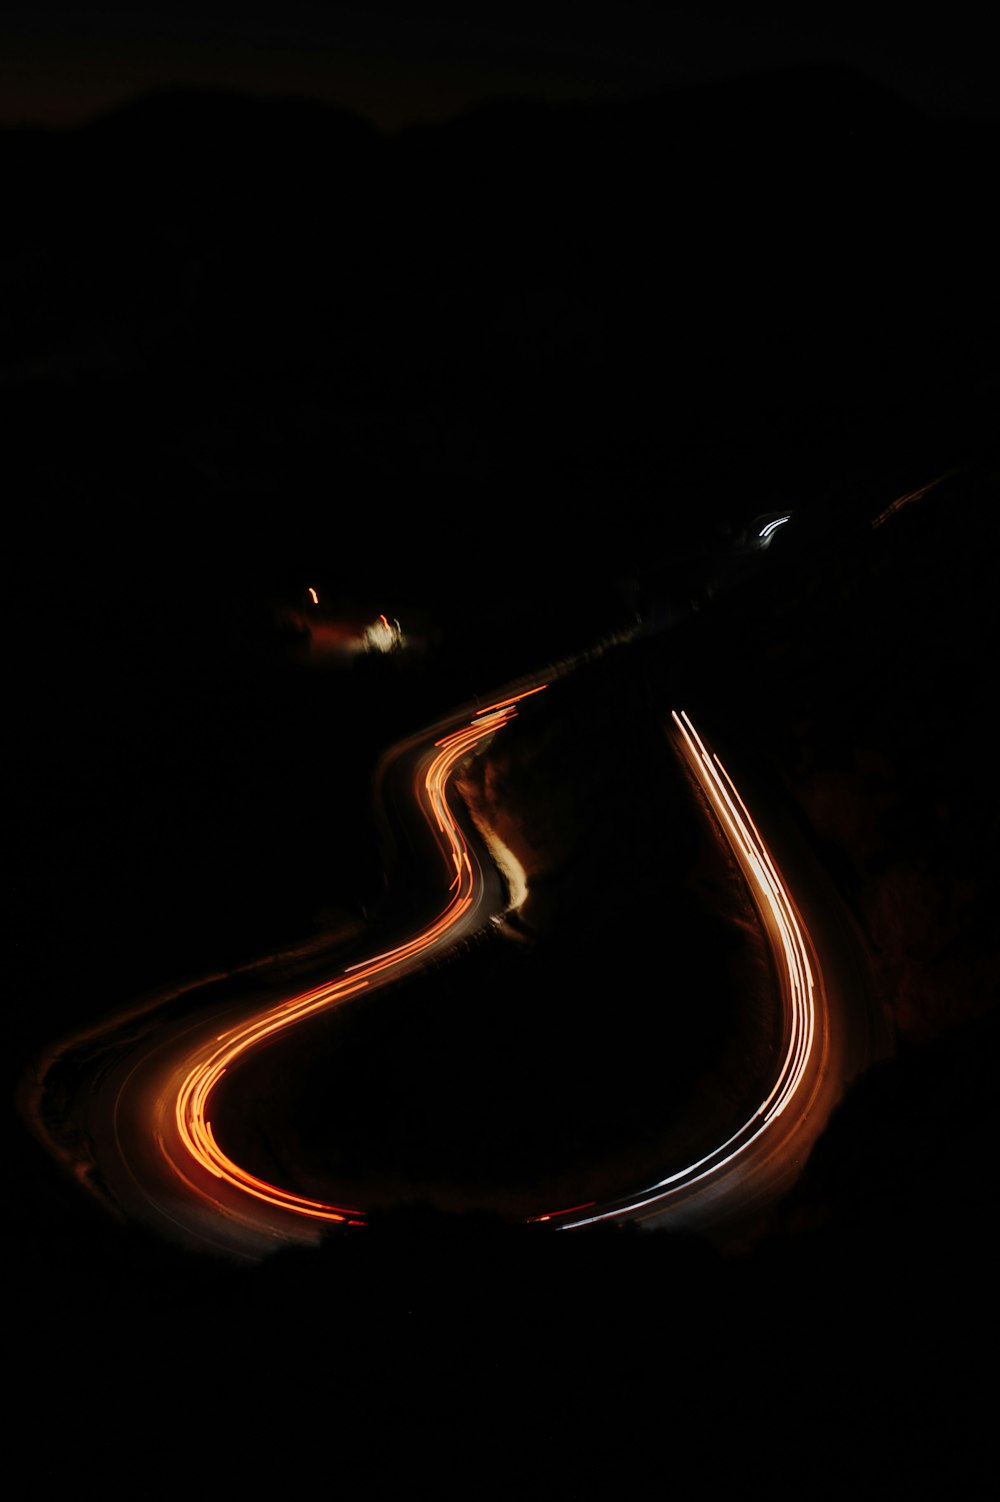 a long exposure photo of a road at night